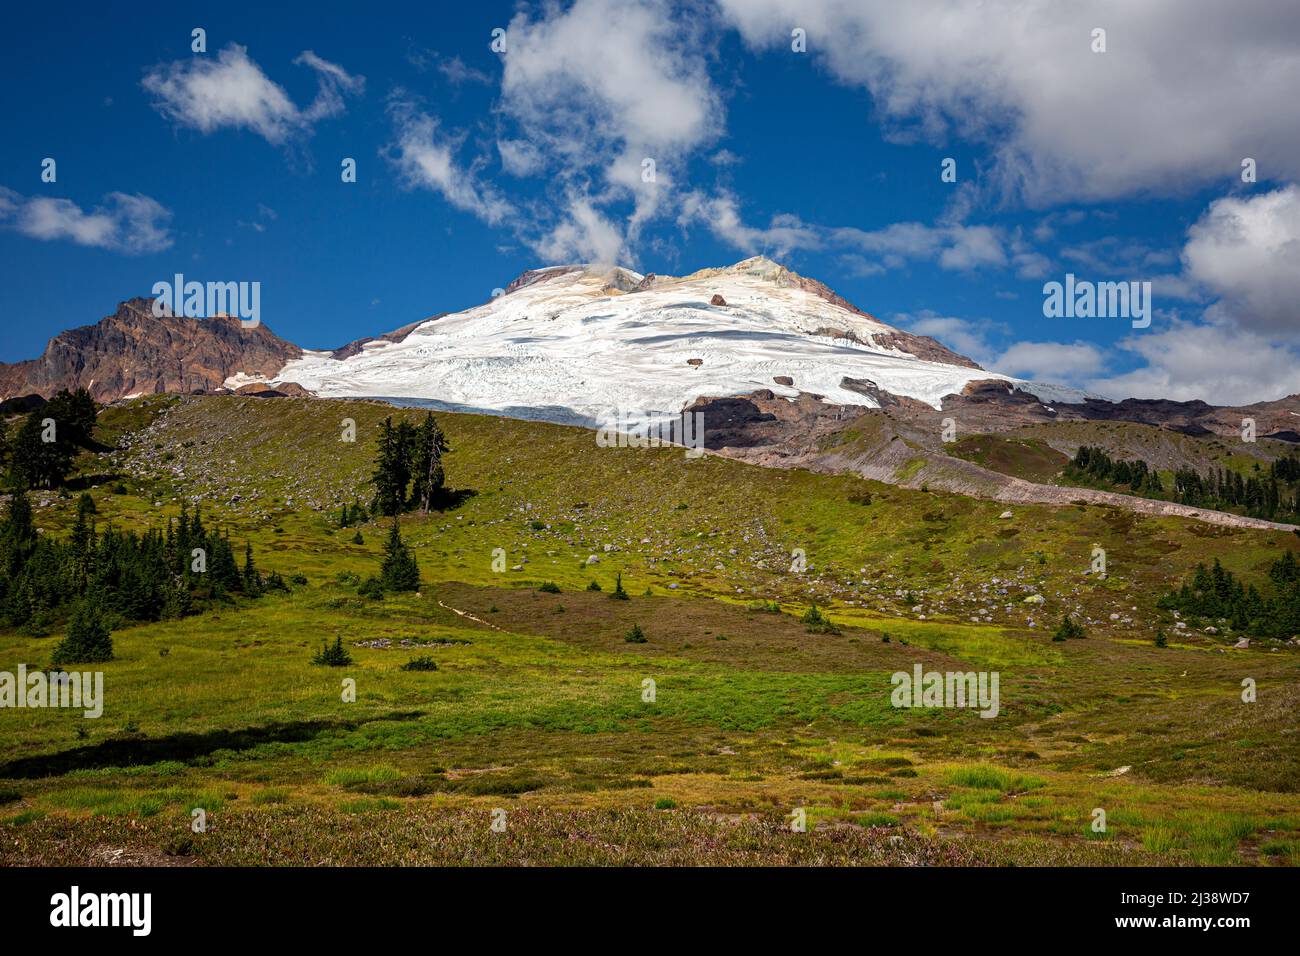 WA21326-00...WASHINGTON - Meadows below the Railroad Grade leading to Easton Glacier and the summit of Mount Baker in the Mount Baker National Recreat Stock Photo